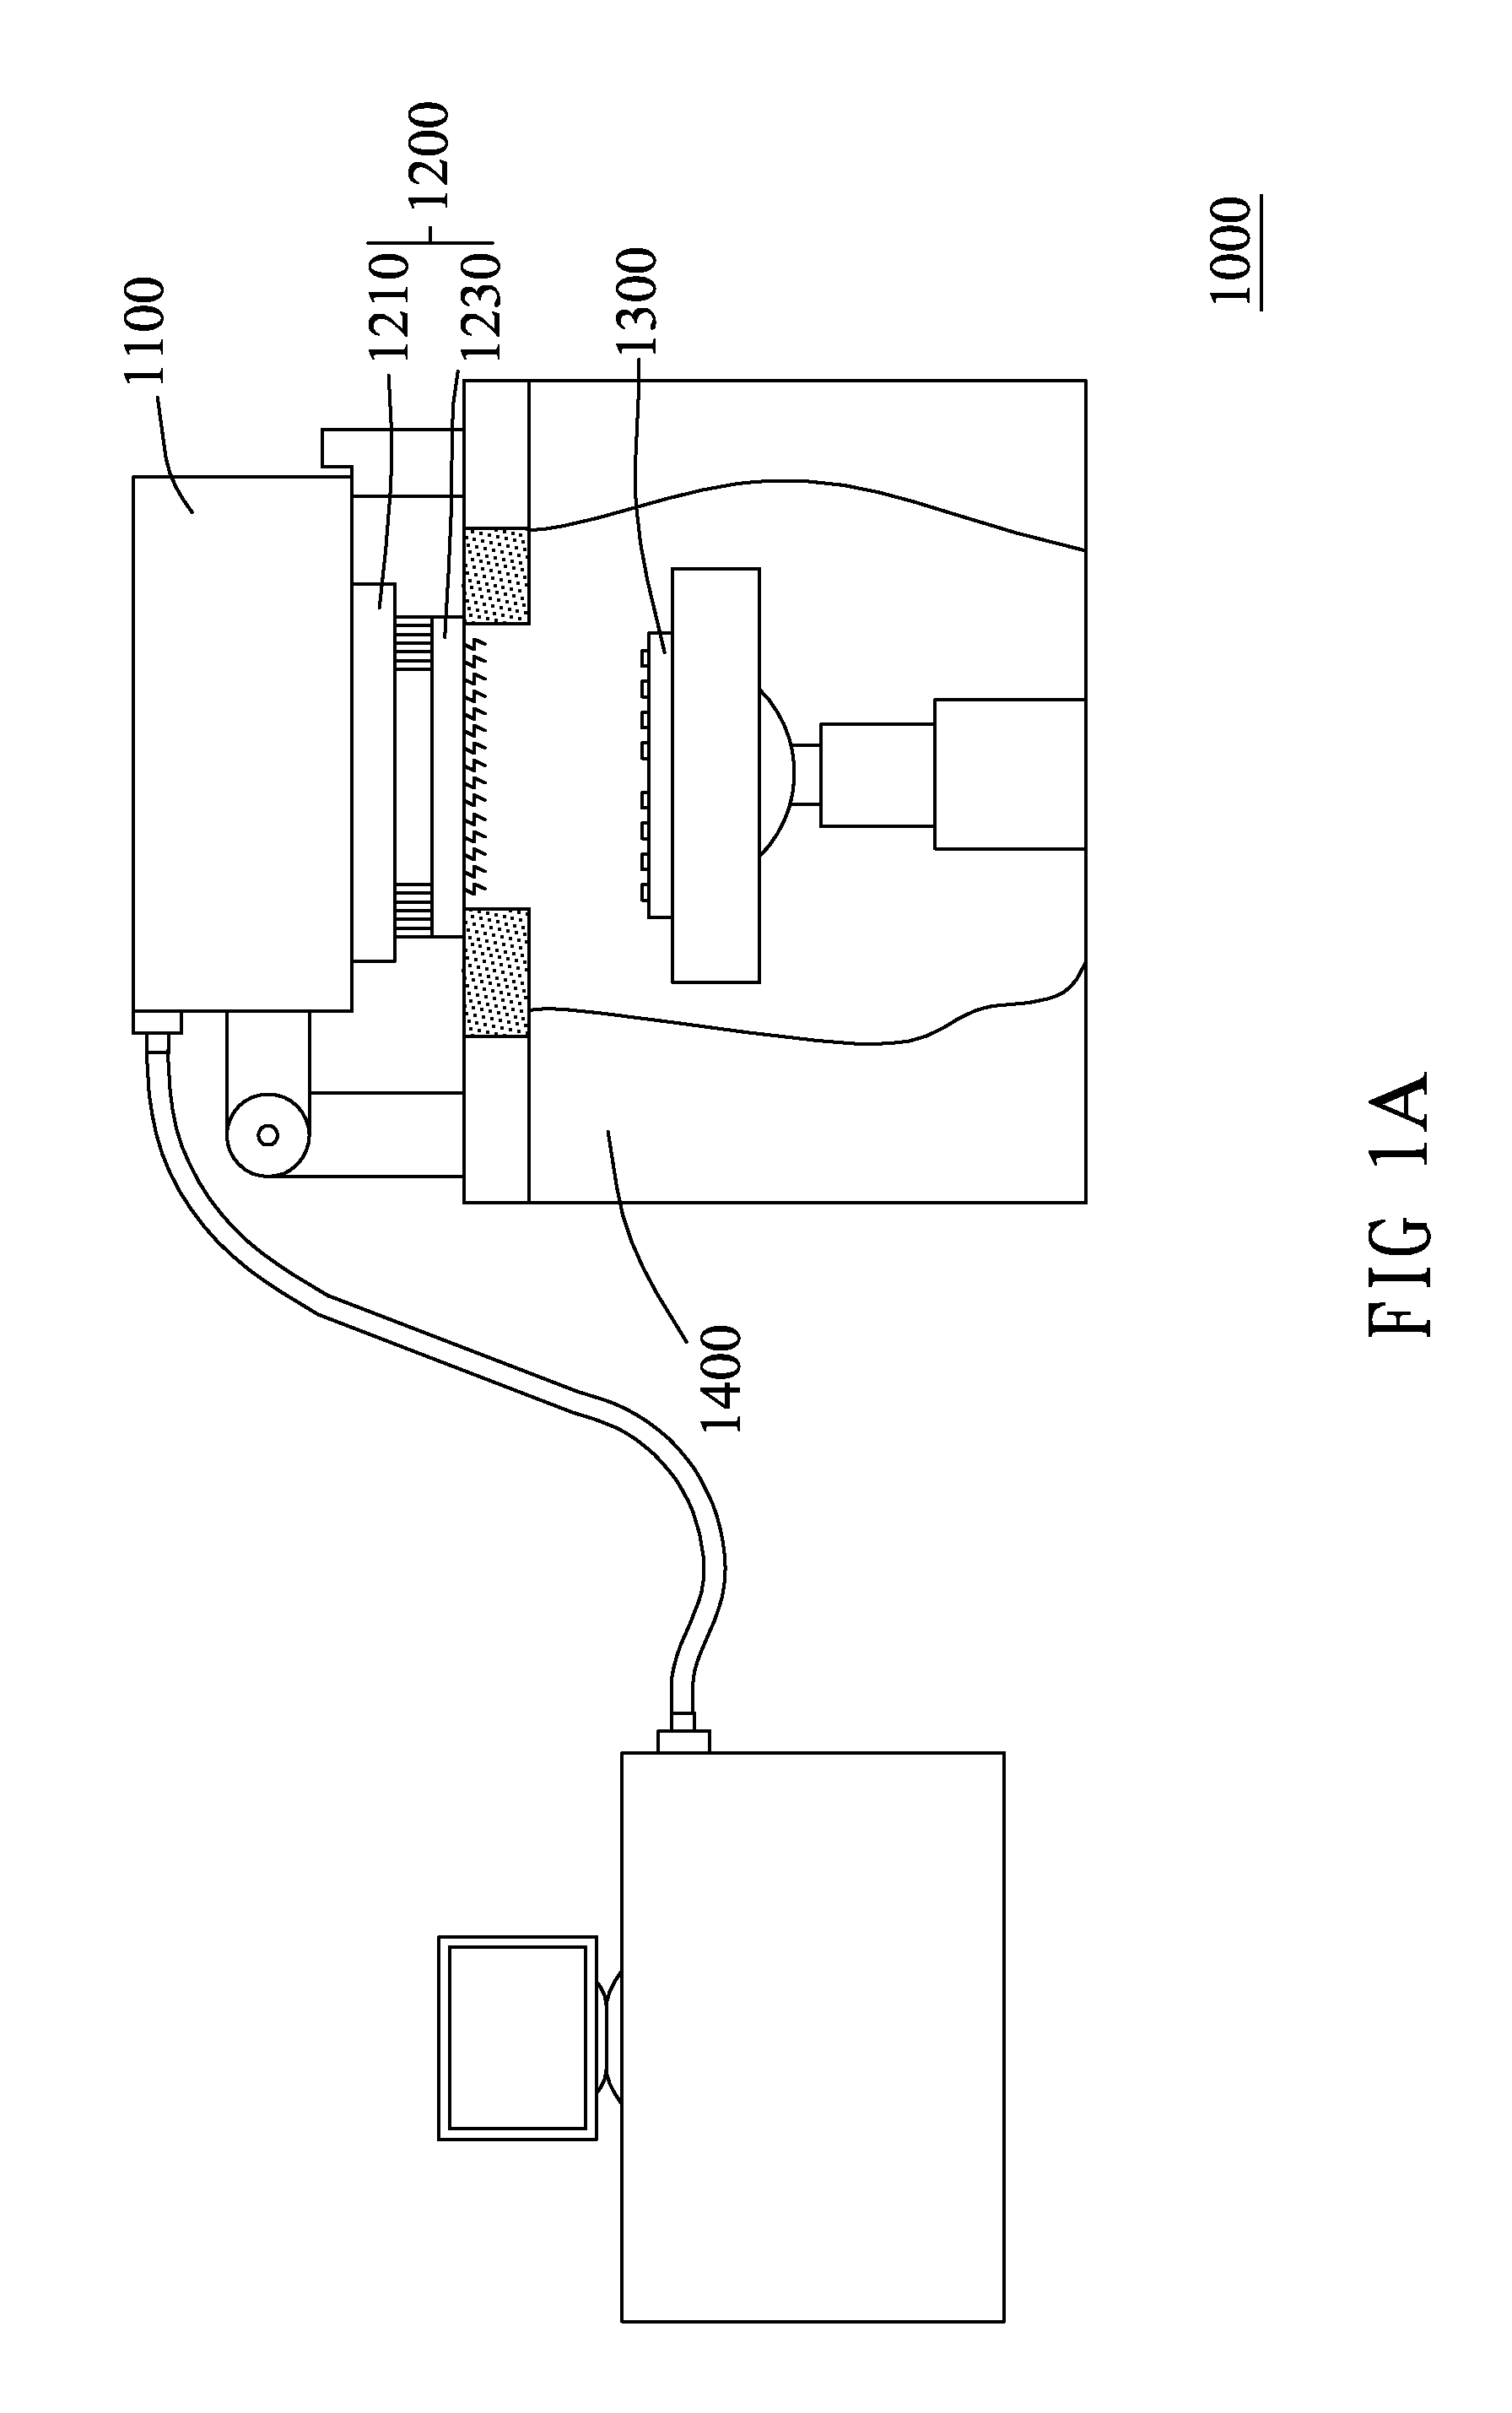 Assembly method of direct-docking probing device